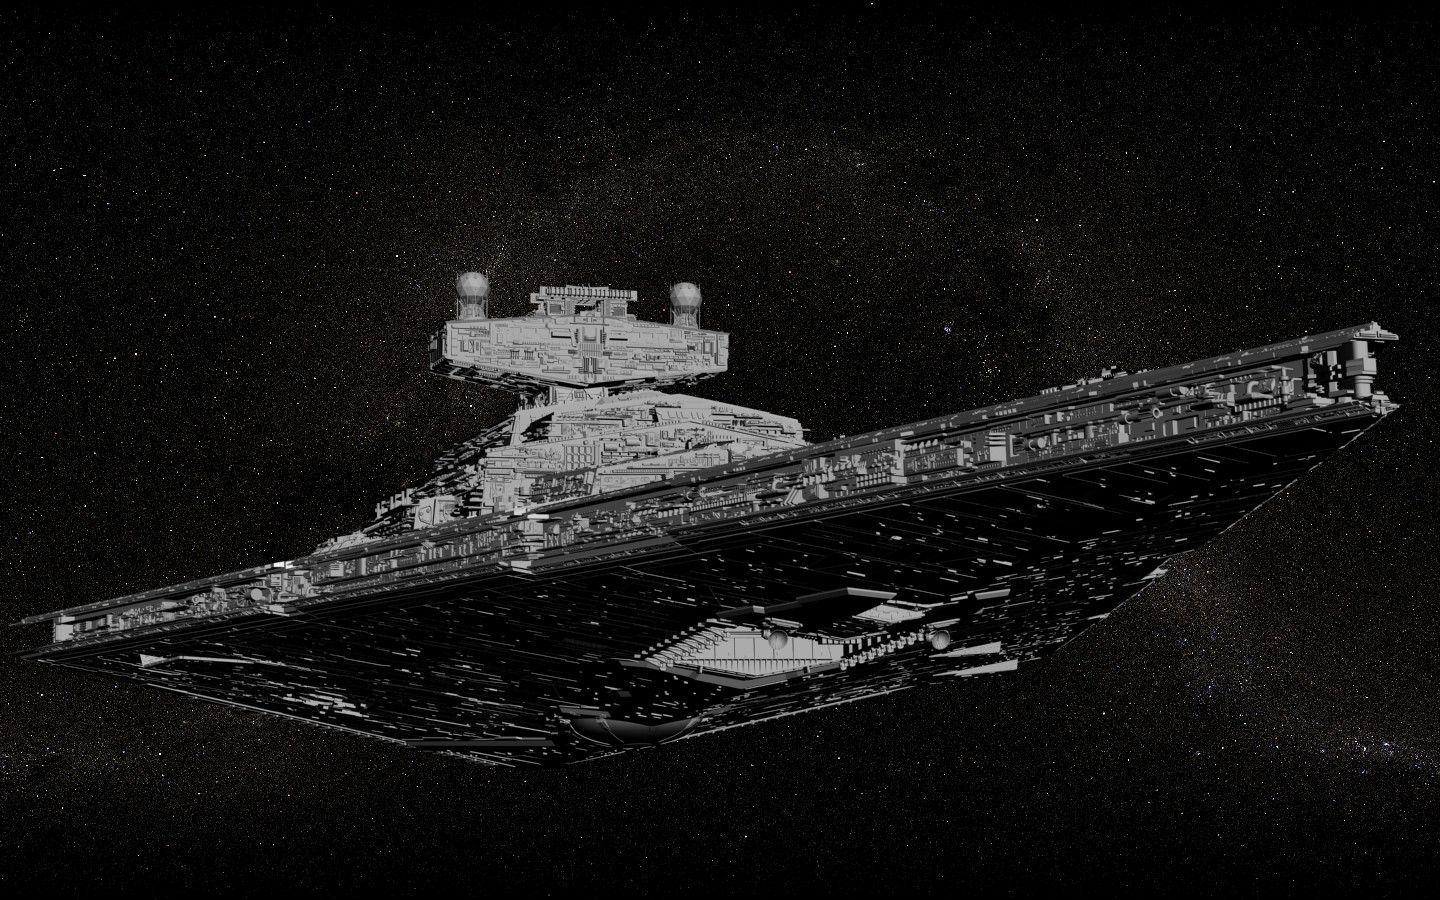 Imperial Star Destroyer HD image